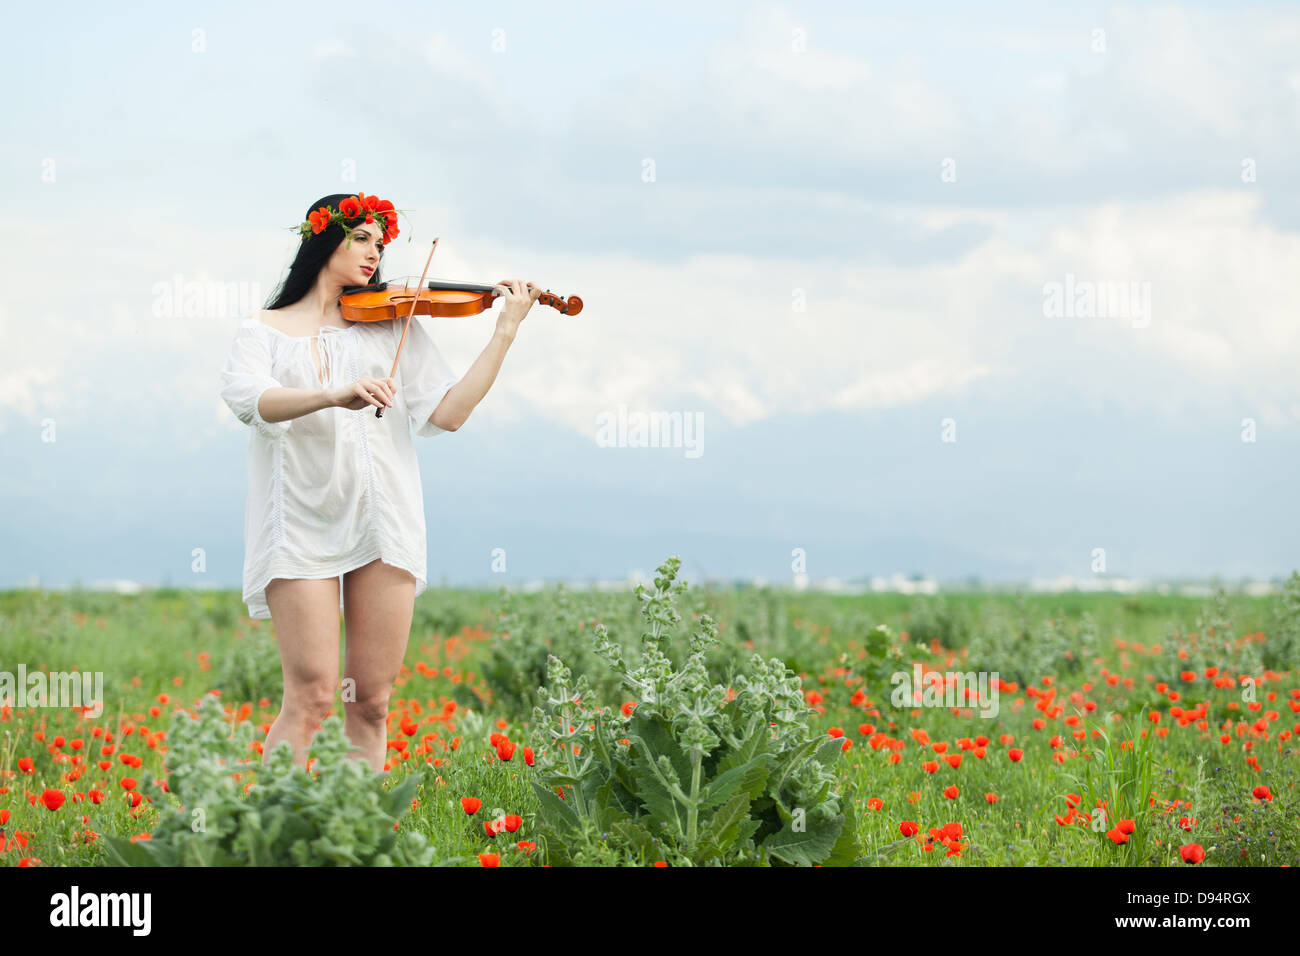 A girl with a violin in a white shirt on a poppy field Stock Photo